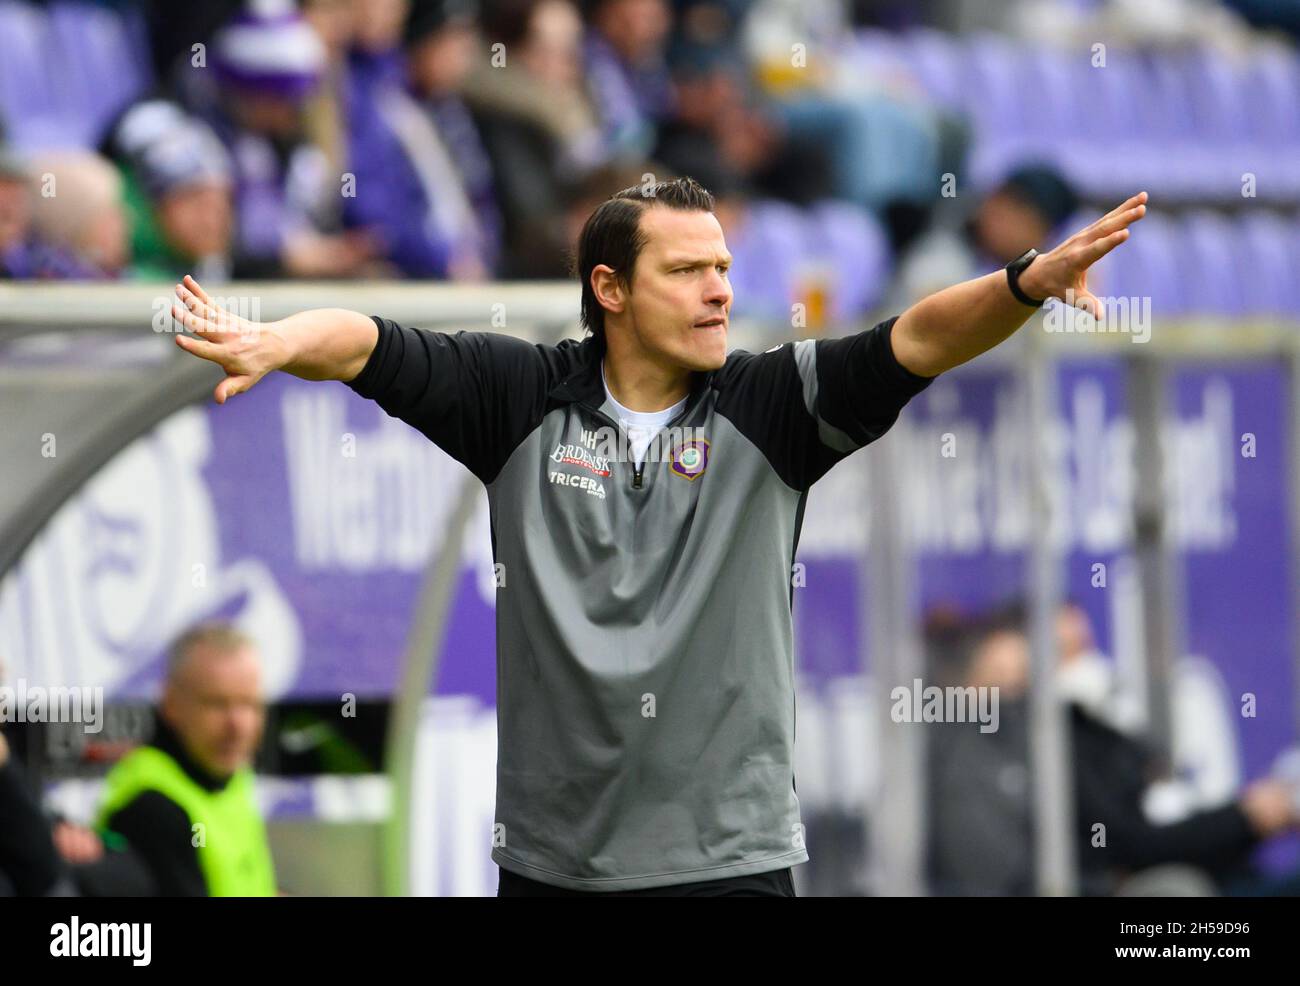 Aue, Germany. 07th Nov, 2021. Football: 2. Bundesliga, Erzgebirge Aue - 1. FC Heidenheim, Matchday 13, Erzgebirgsstadion. Aue's team manager Marc Hensel gestures. Credit: Robert Michael/dpa-Zentralbild/dpa - IMPORTANT NOTE: In accordance with the regulations of the DFL Deutsche Fußball Liga and/or the DFB Deutscher Fußball-Bund, it is prohibited to use or have used photographs taken in the stadium and/or of the match in the form of sequence pictures and/or video-like photo series./dpa/Alamy Live News Stock Photo